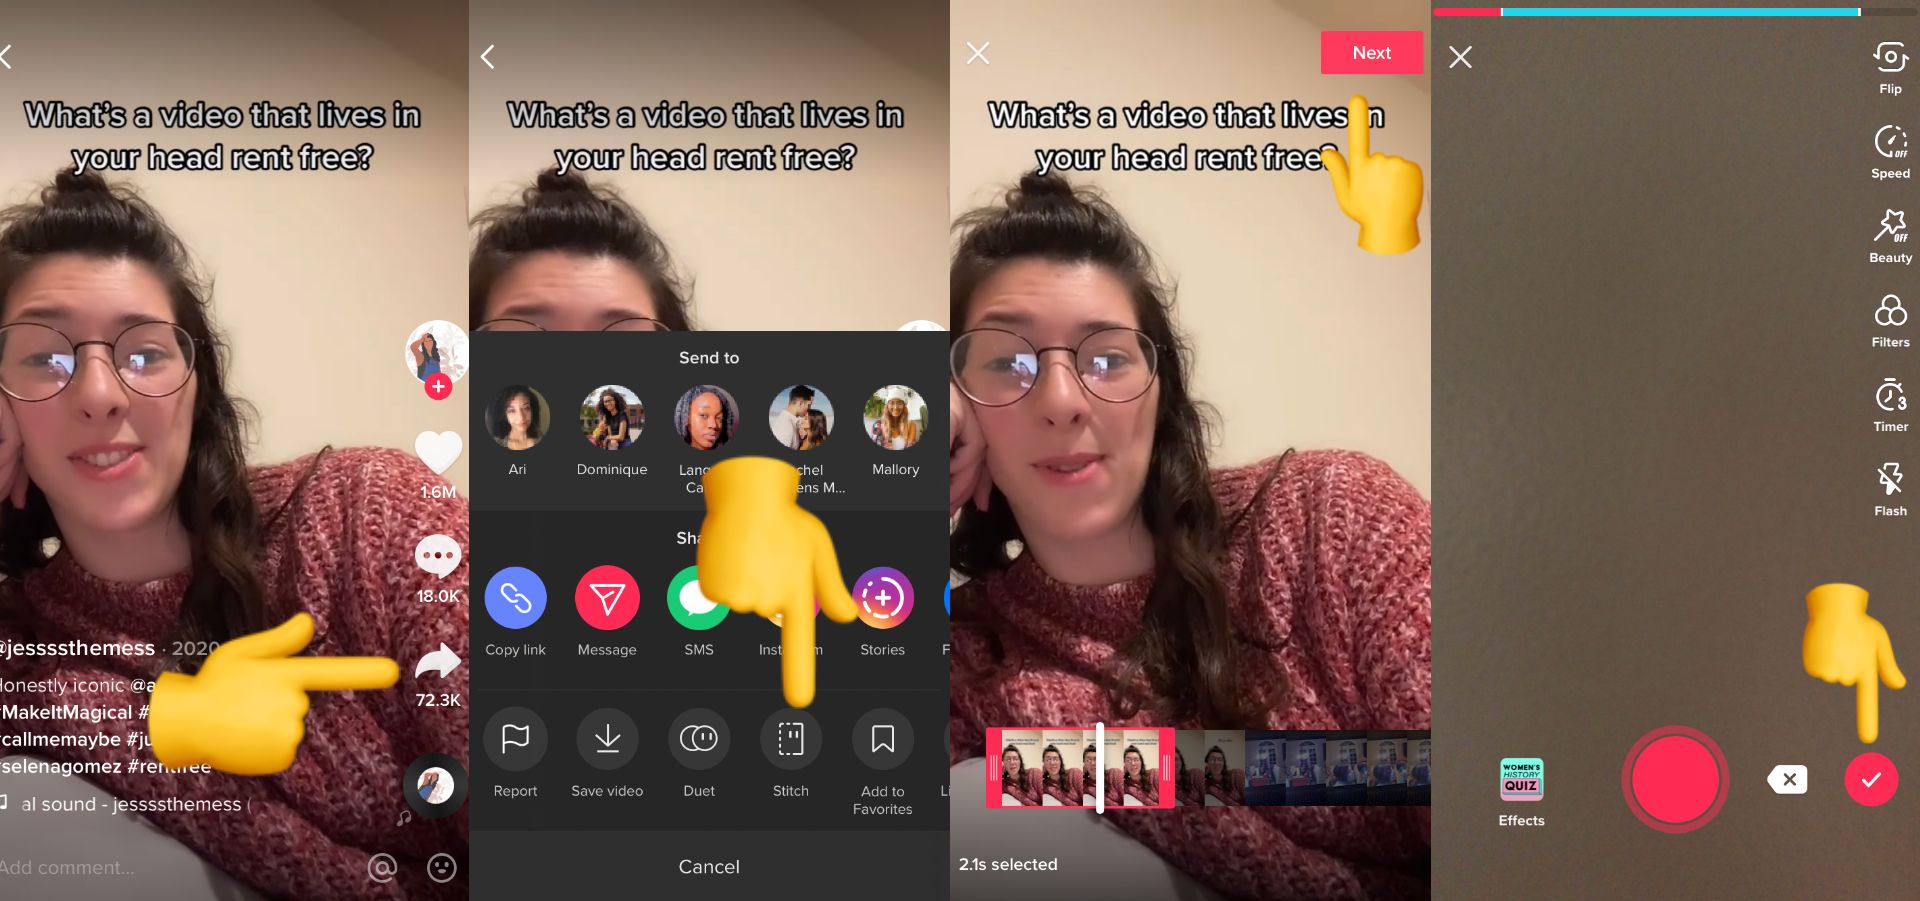 How to Find Stitched Videos on Tiktok